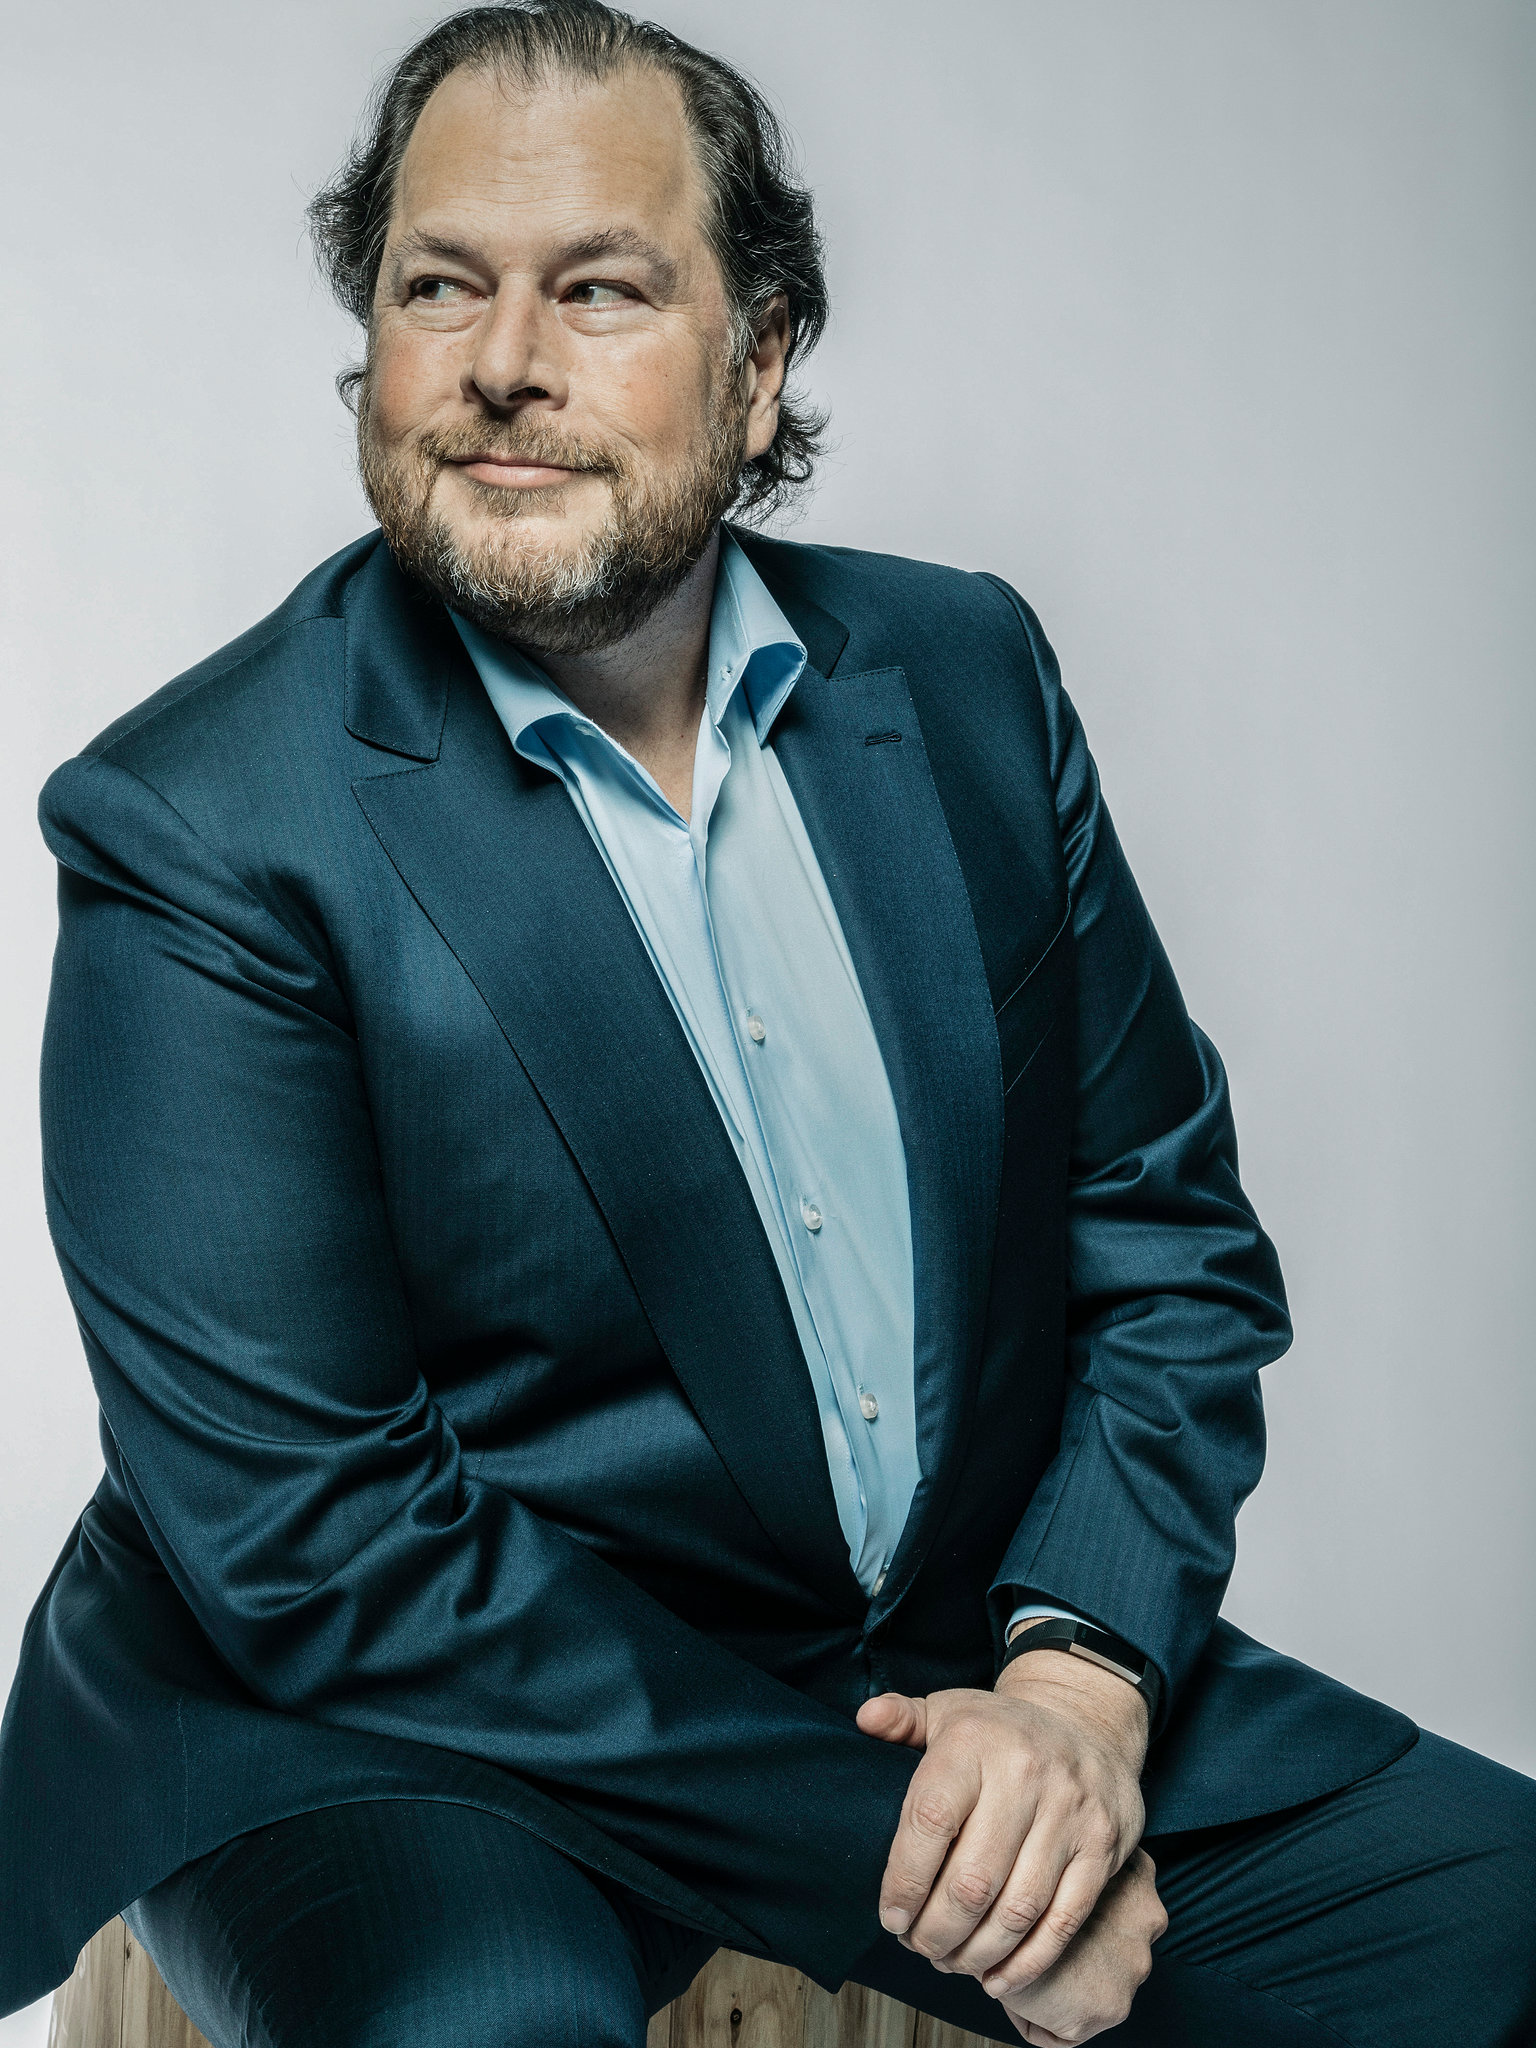 Marc Benioff wearing a blue suit